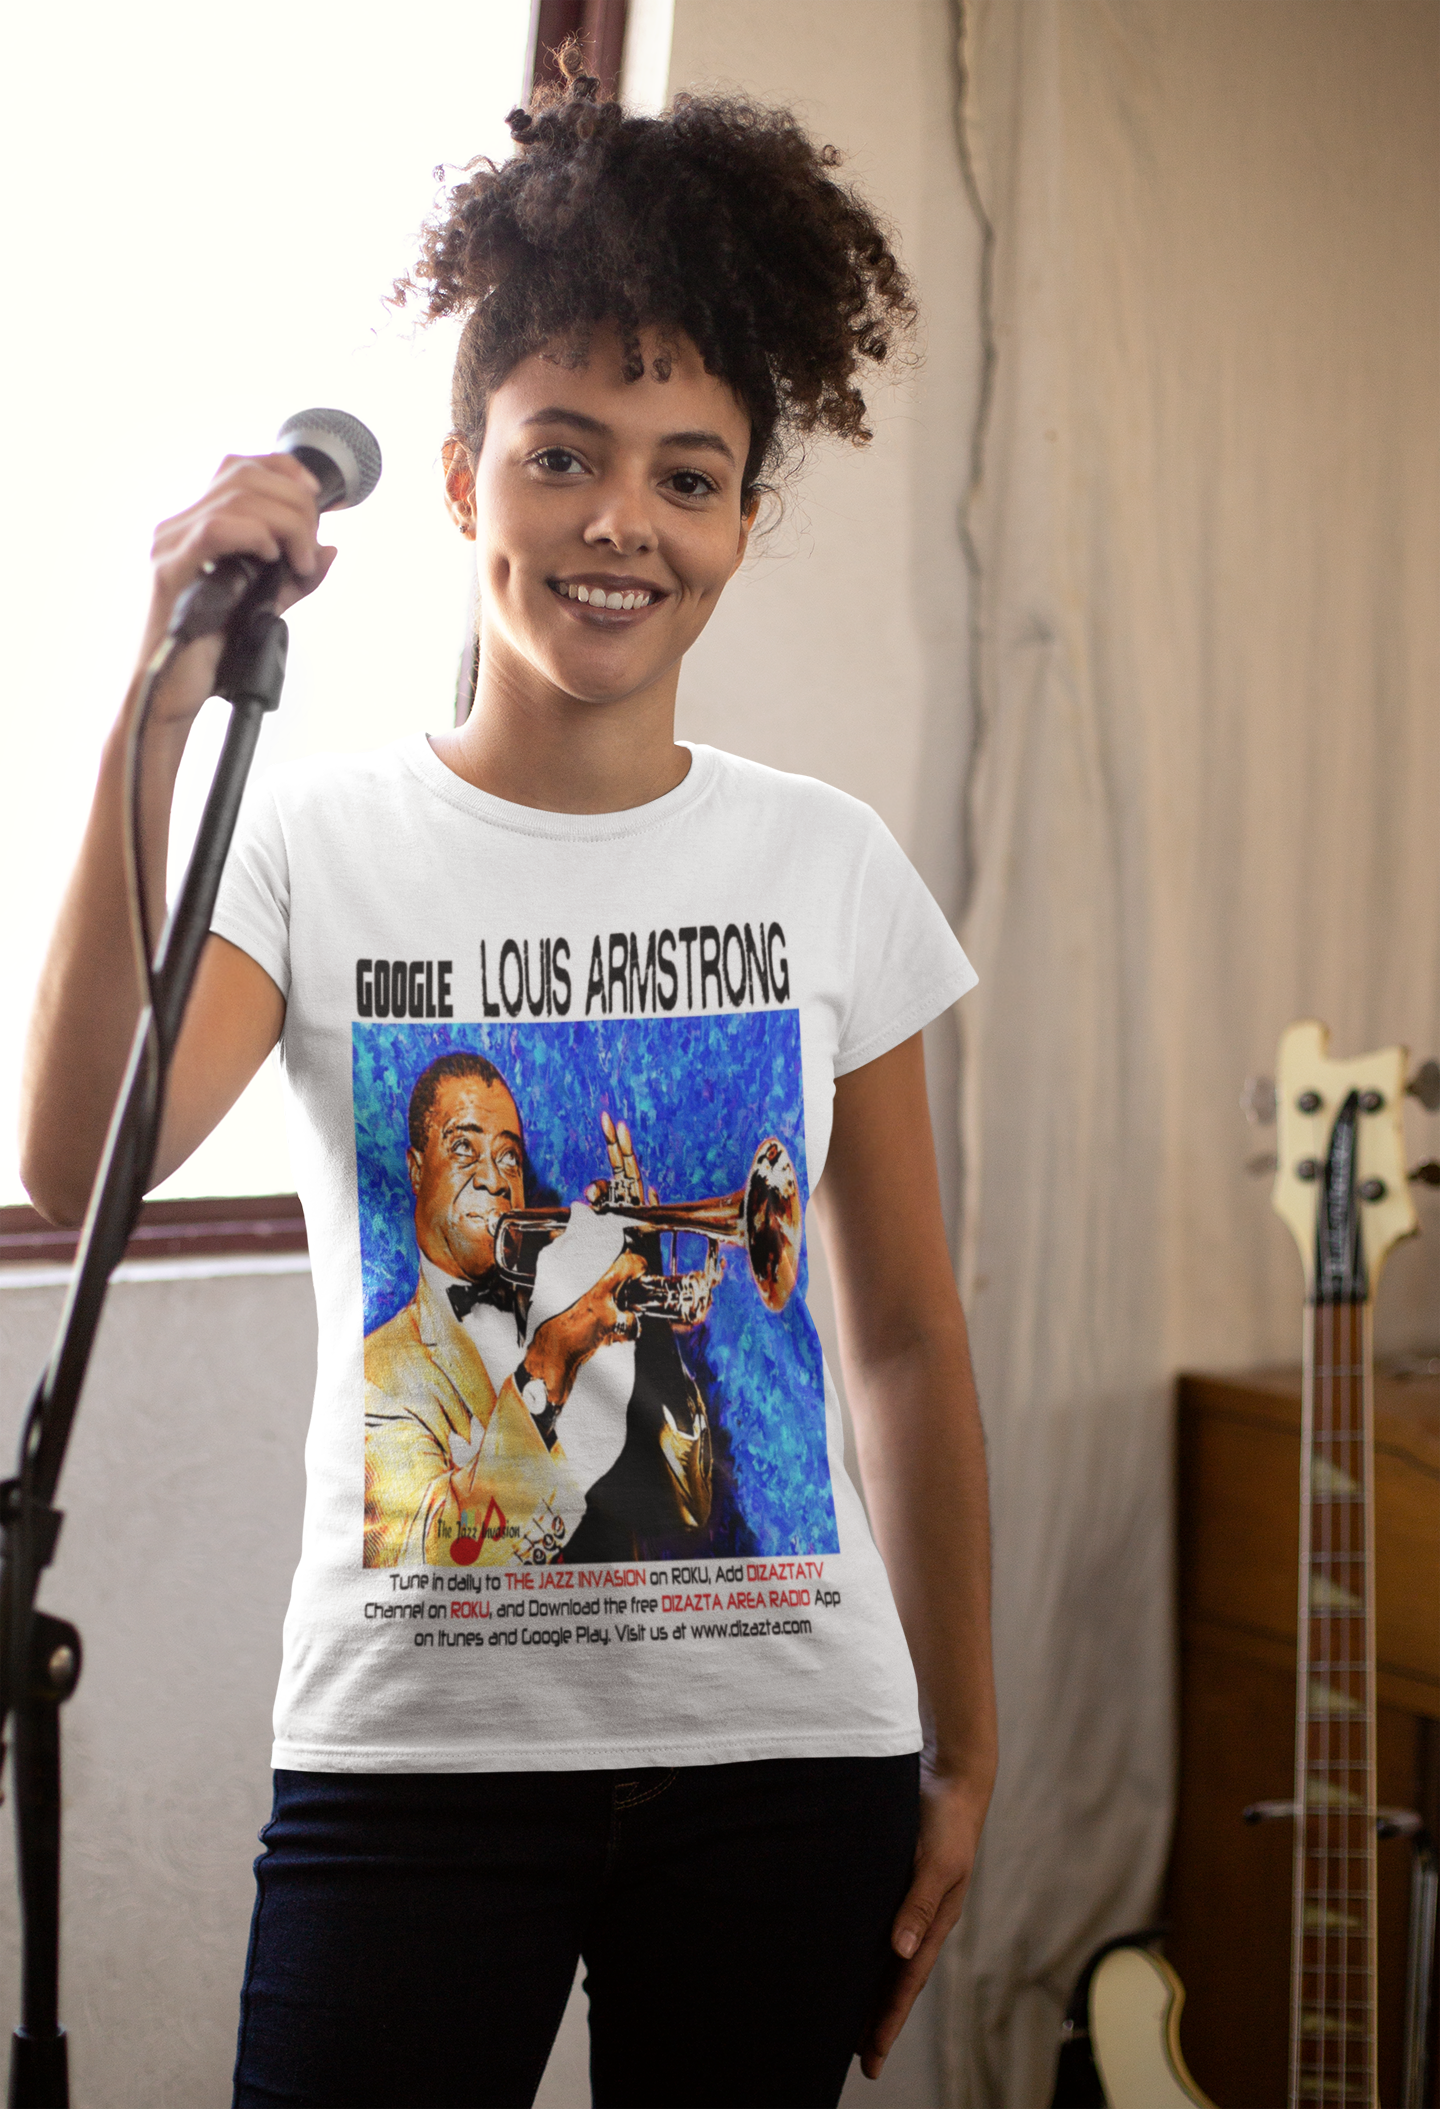 What We Play is Life T-Shirt – Louis Armstrong Official Store